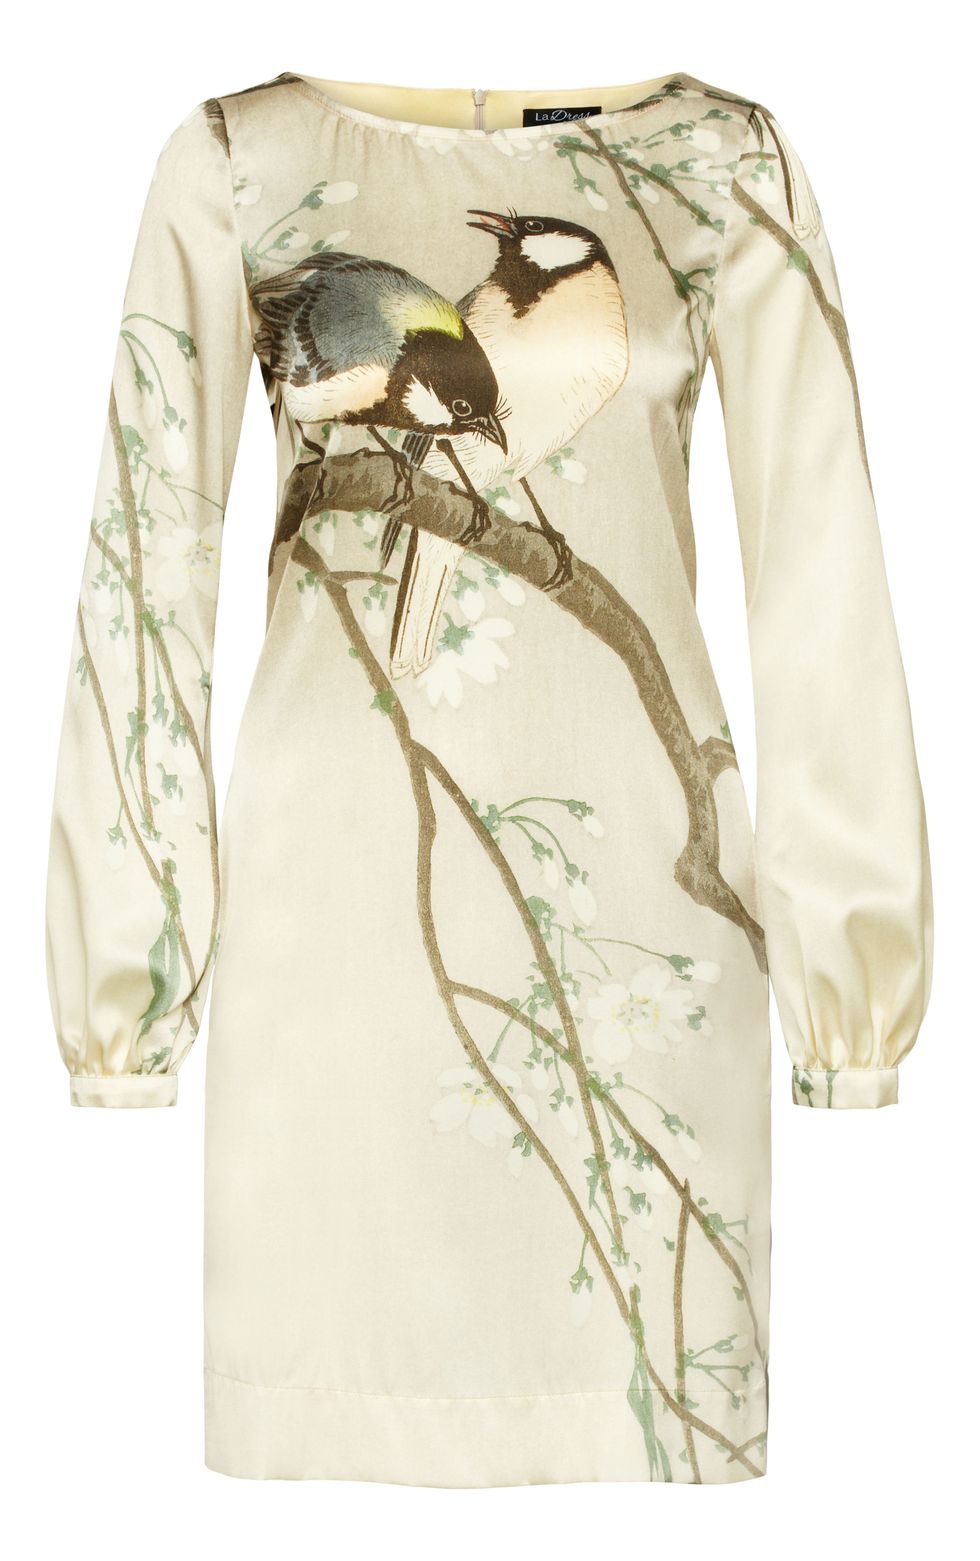 <p>€ 345 via <a href="https://www.ladress.com/nl/products/art-dress-koson-ii?ref_url=%2Fnl%2Ft%2Fcategories%2Fdresses%23product_1073200468">ladress.com</a><span class="redactor-invisible-space" data-verified="redactor" data-redactor-tag="span" data-redactor-class="redactor-invisible-space"></span><br></p>